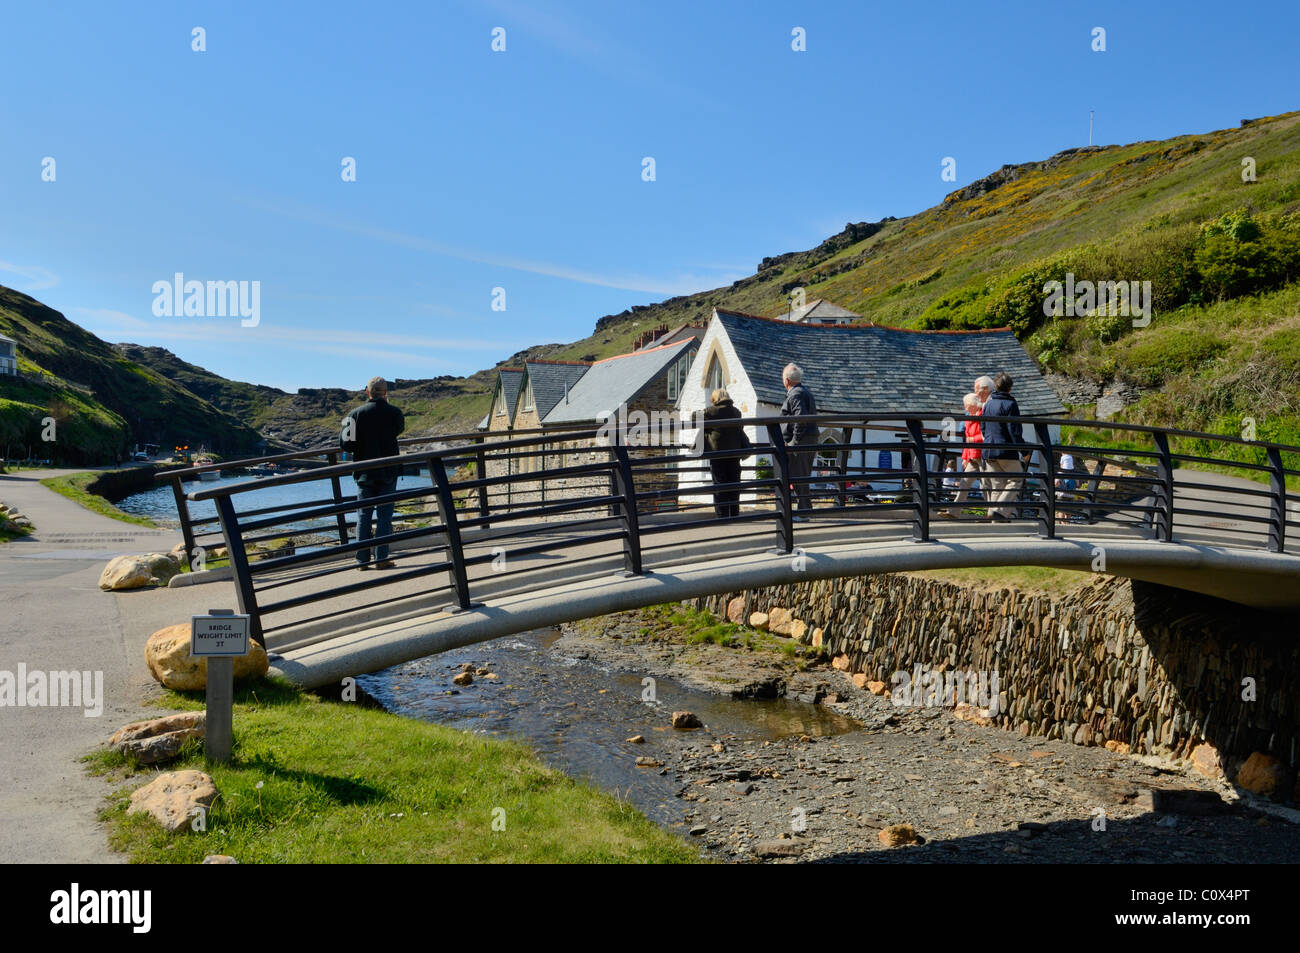 People on the footbridge over the River Valency at Boscastle Harbour, Cornwall, England. Stock Photo